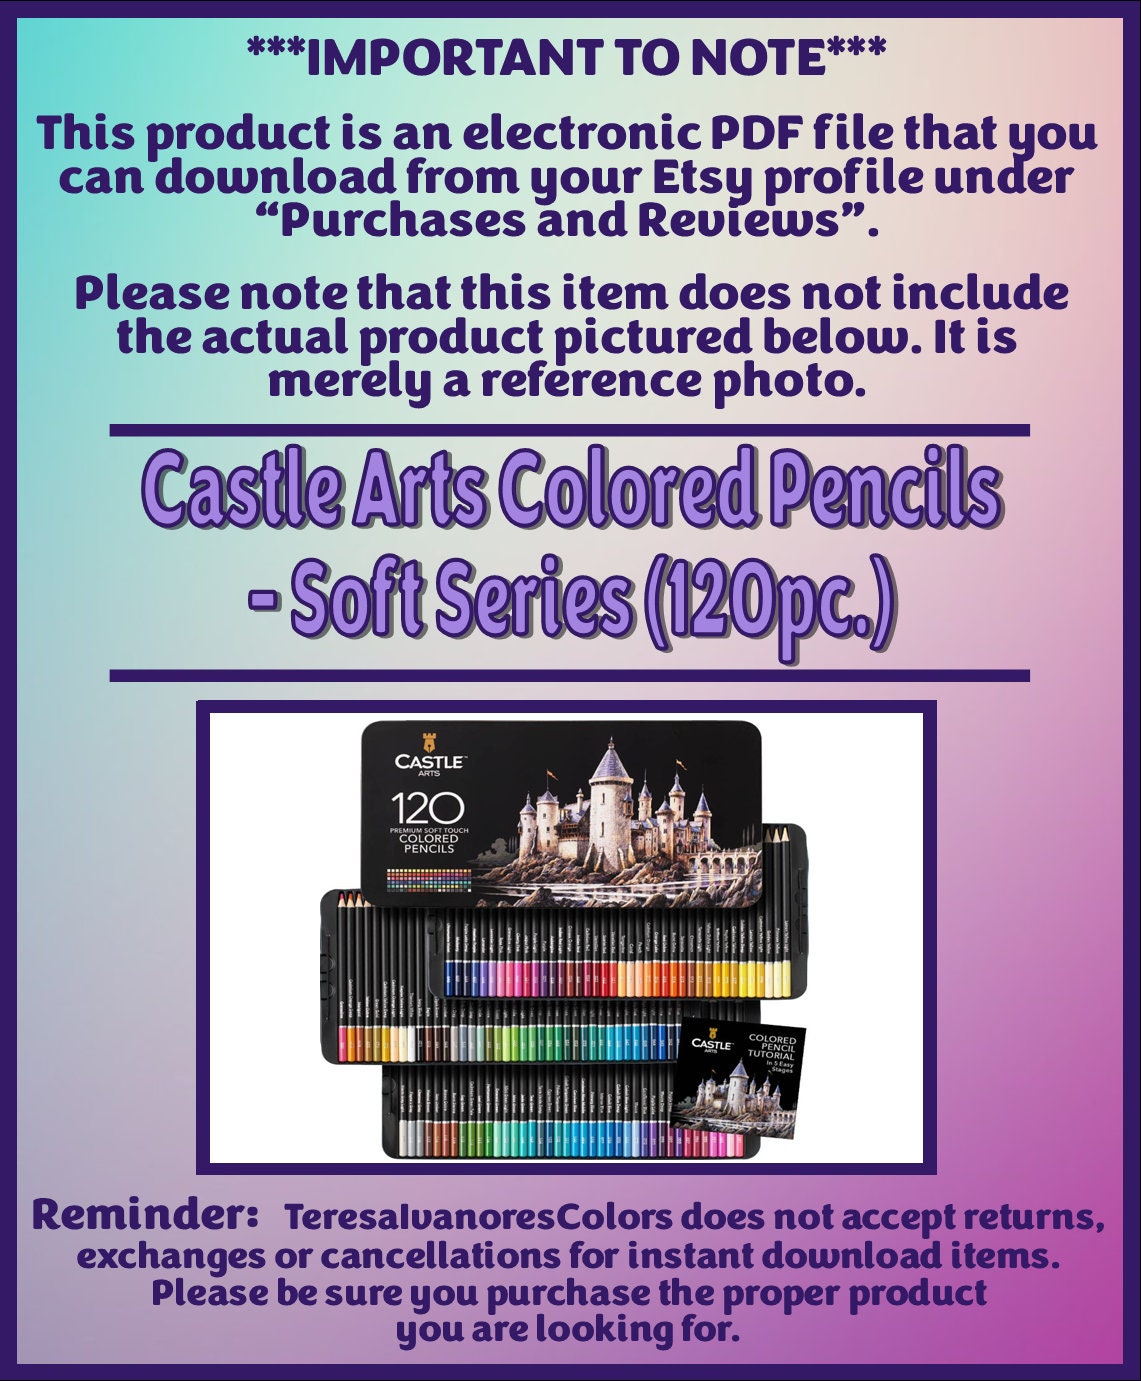 Swatch & Chat, New 120 Castle Arts Colored Pencils